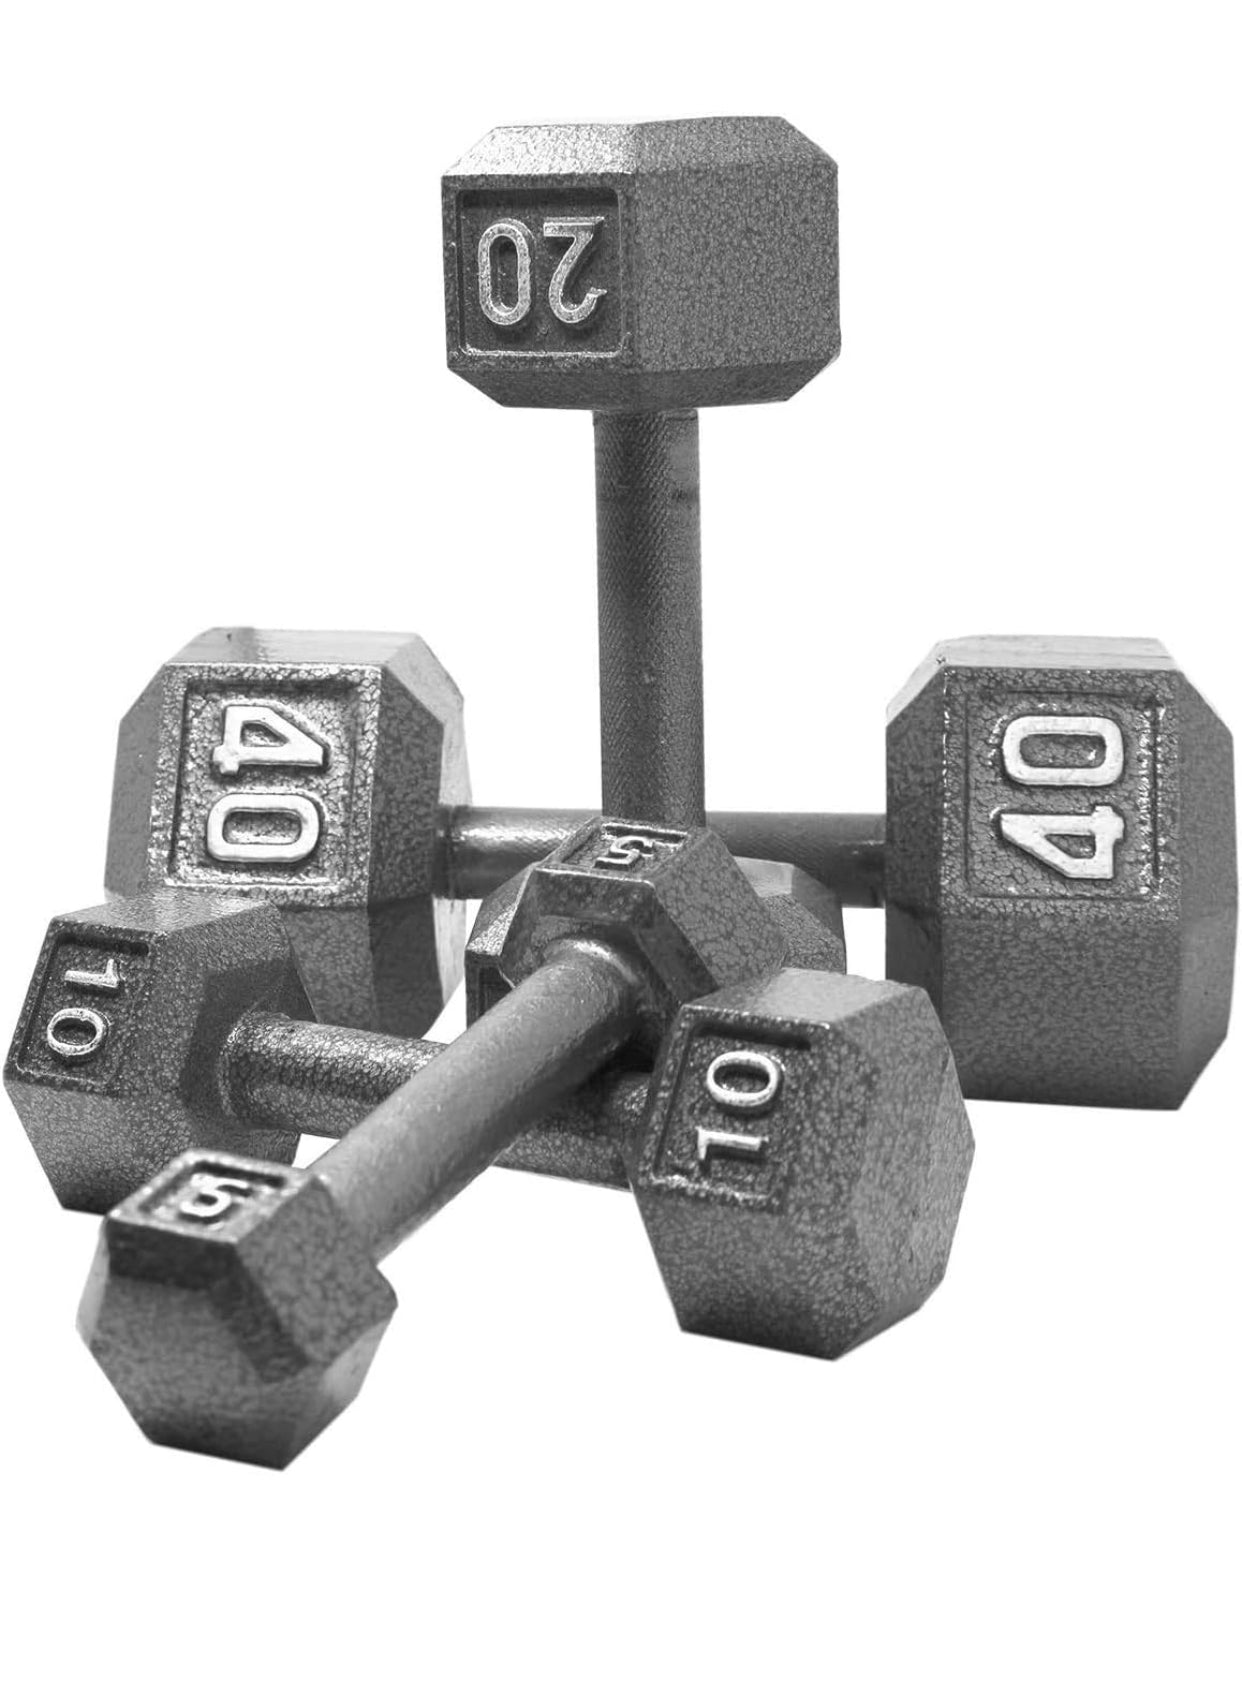 hex dumbbell set in multiple weights